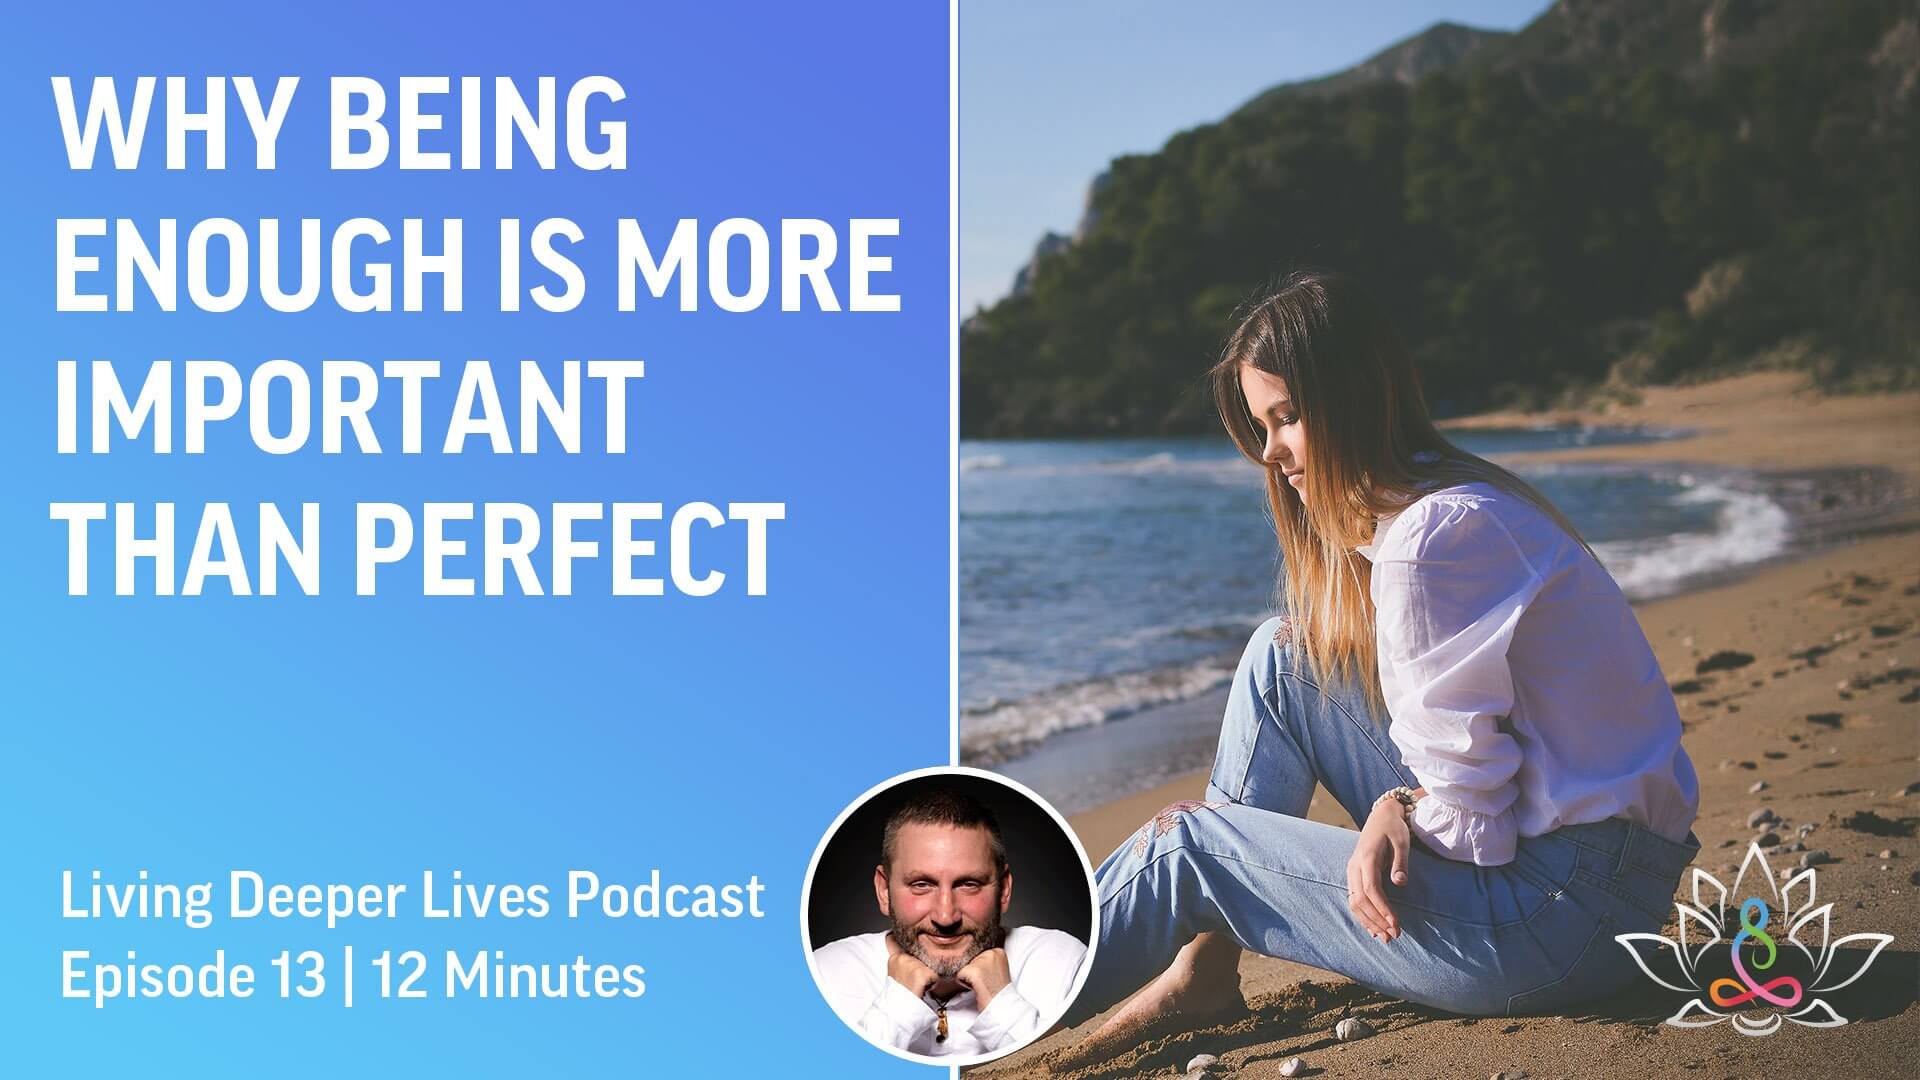 Podcast Steven Webb Episode 13 Why being enough is more important than perfectFull HD